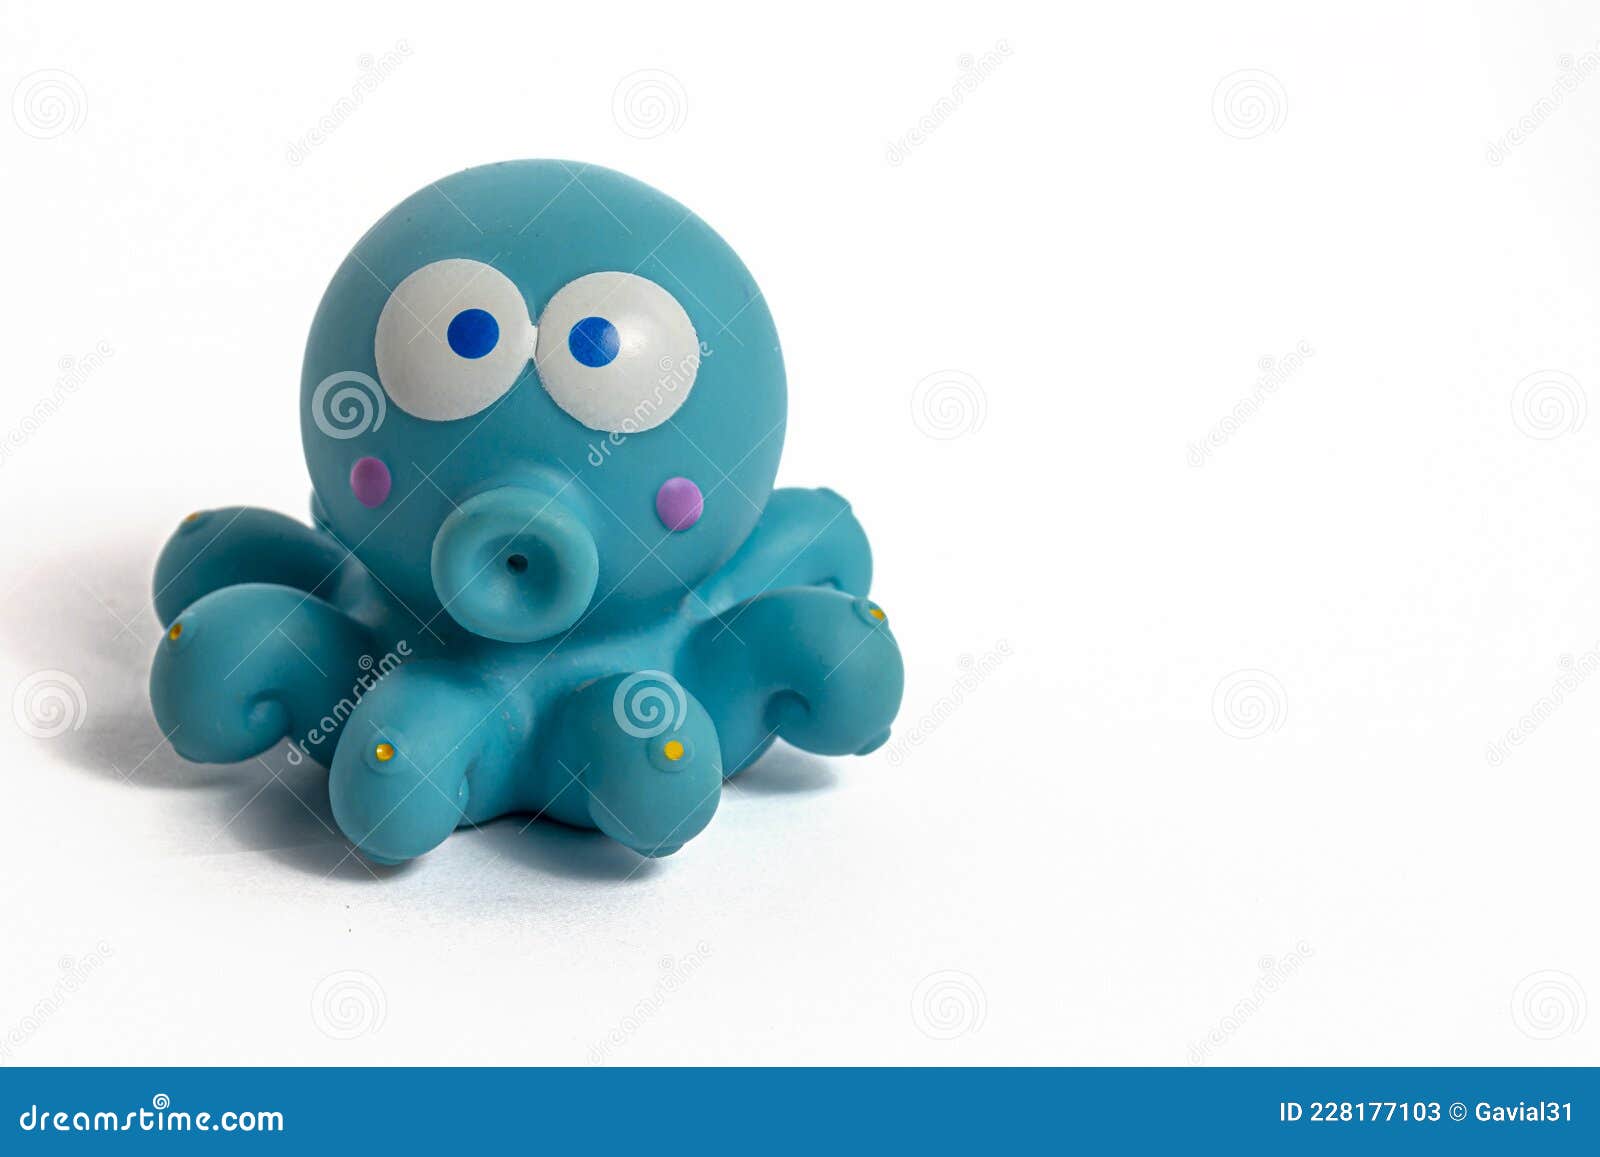 Children S Rubber Toy Octopus, on a White Background. Copy Space Stock ...